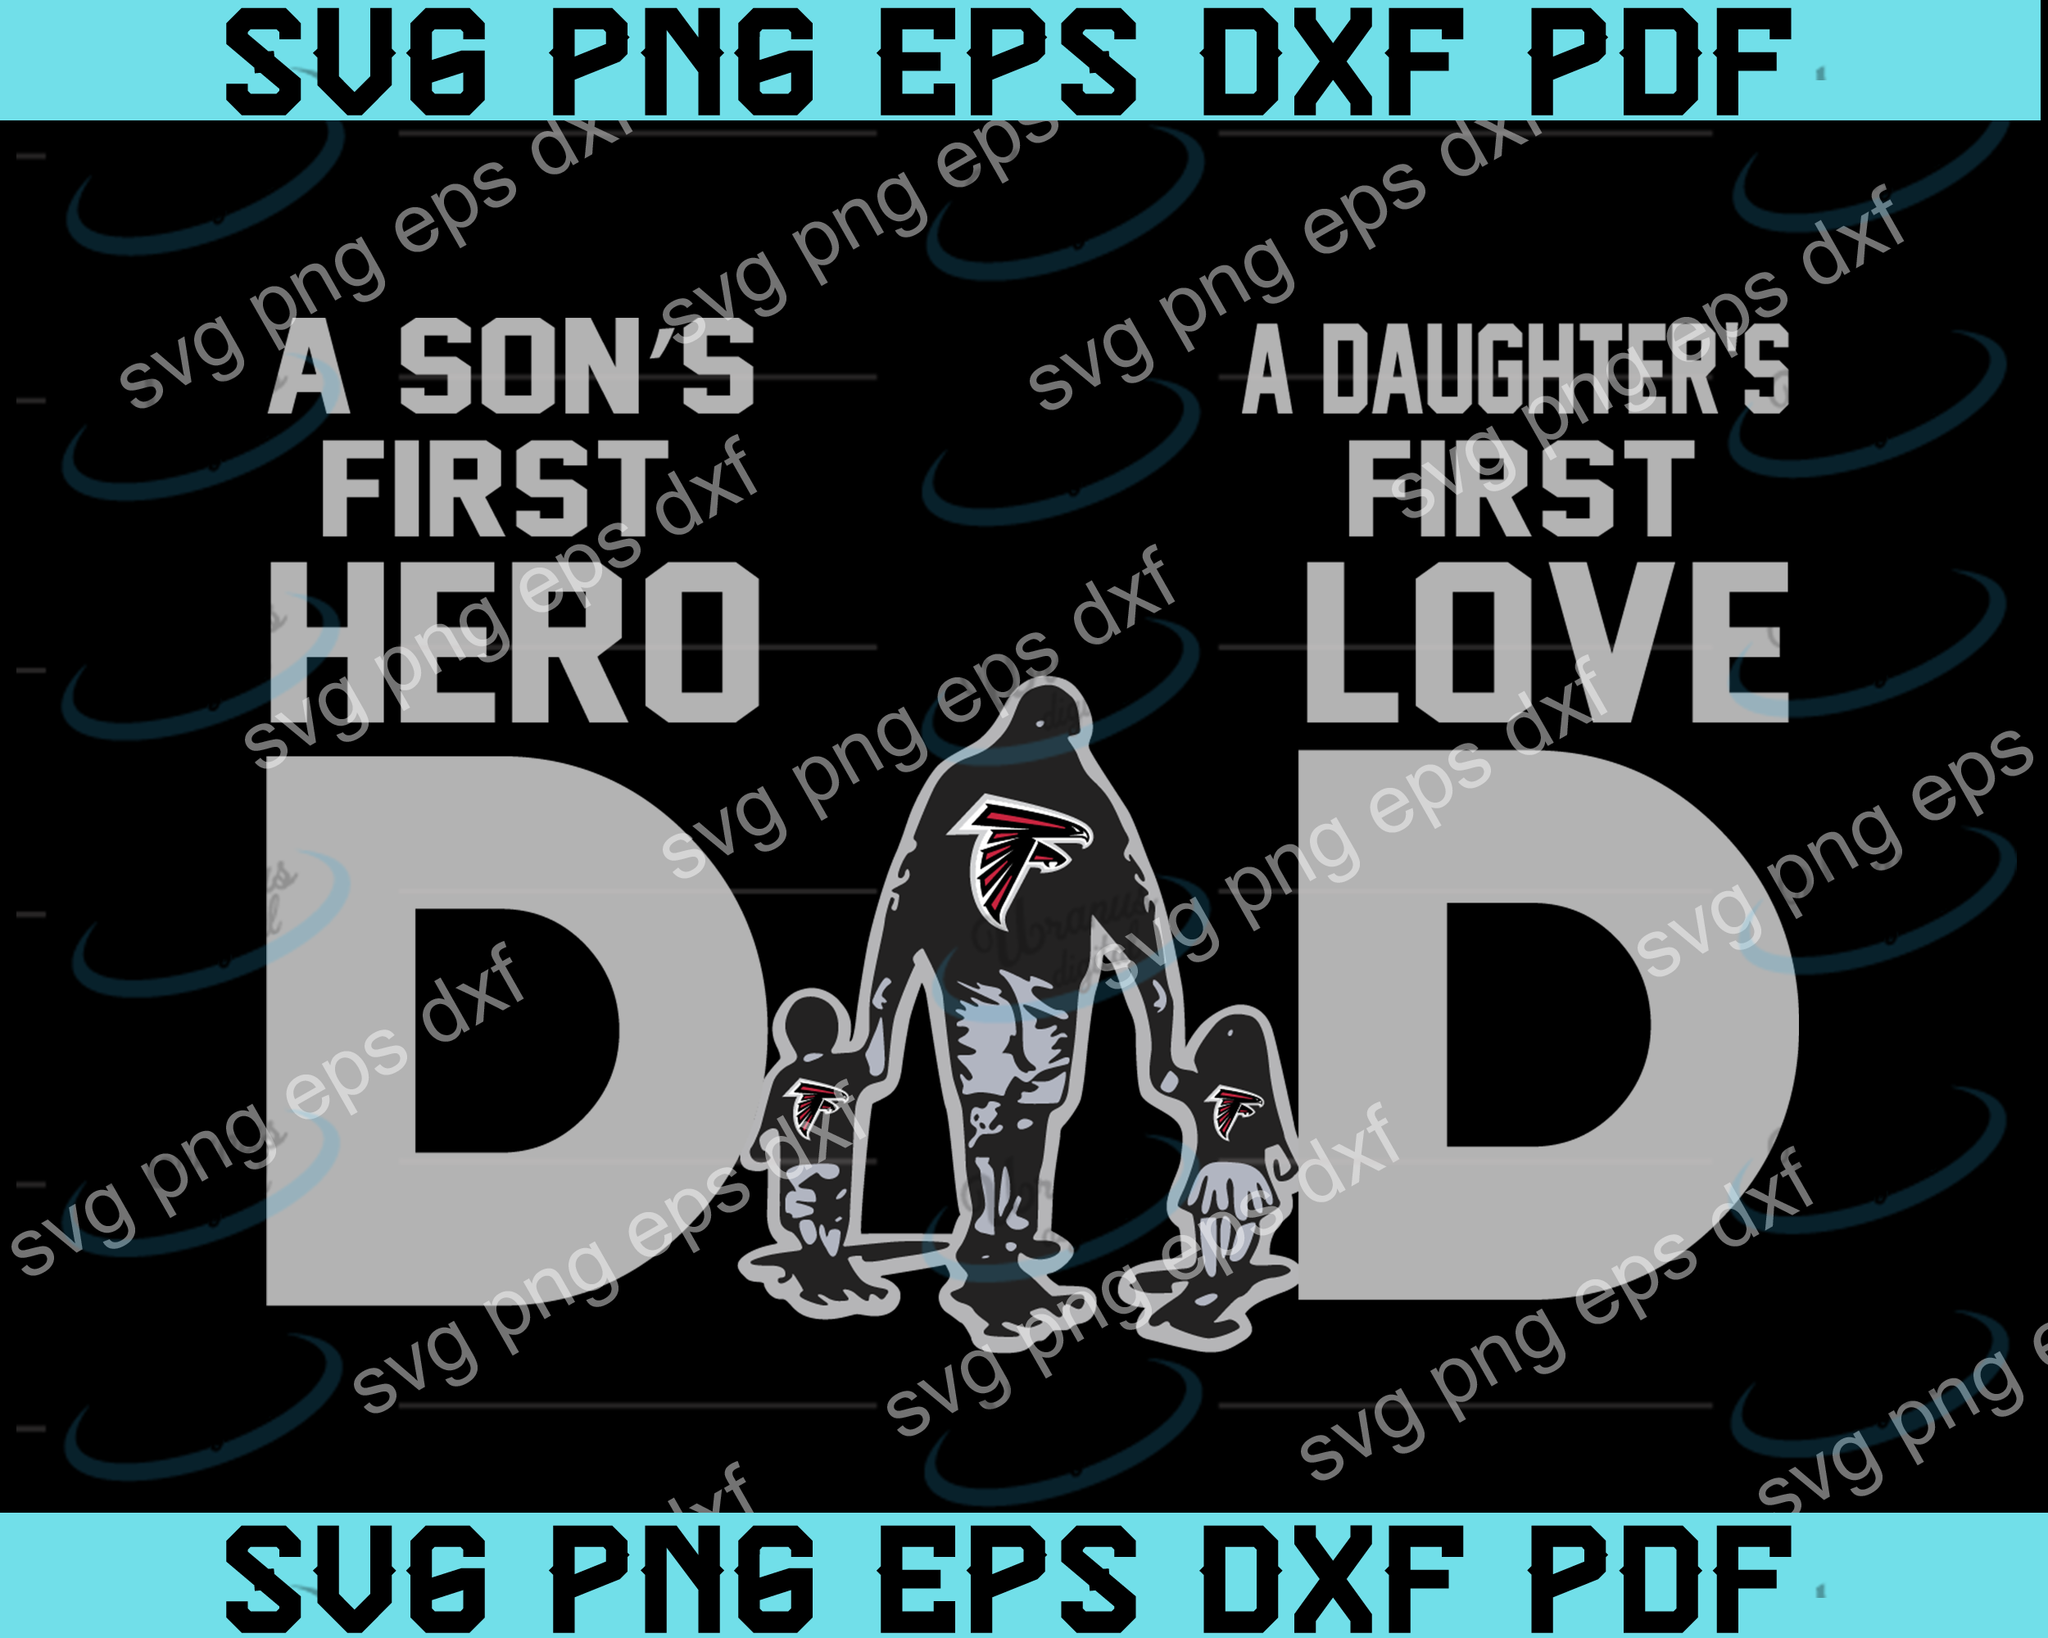 Atlanta Falcons DAD a Son’s First Hero Daughter’s First Love svg, Father’s Day Gift, Footbal ball Fan svg, Dad Nfl svg, Father’s Day svg,Atlanta Falcons DAD svg,Atlanta Falcons DAD png